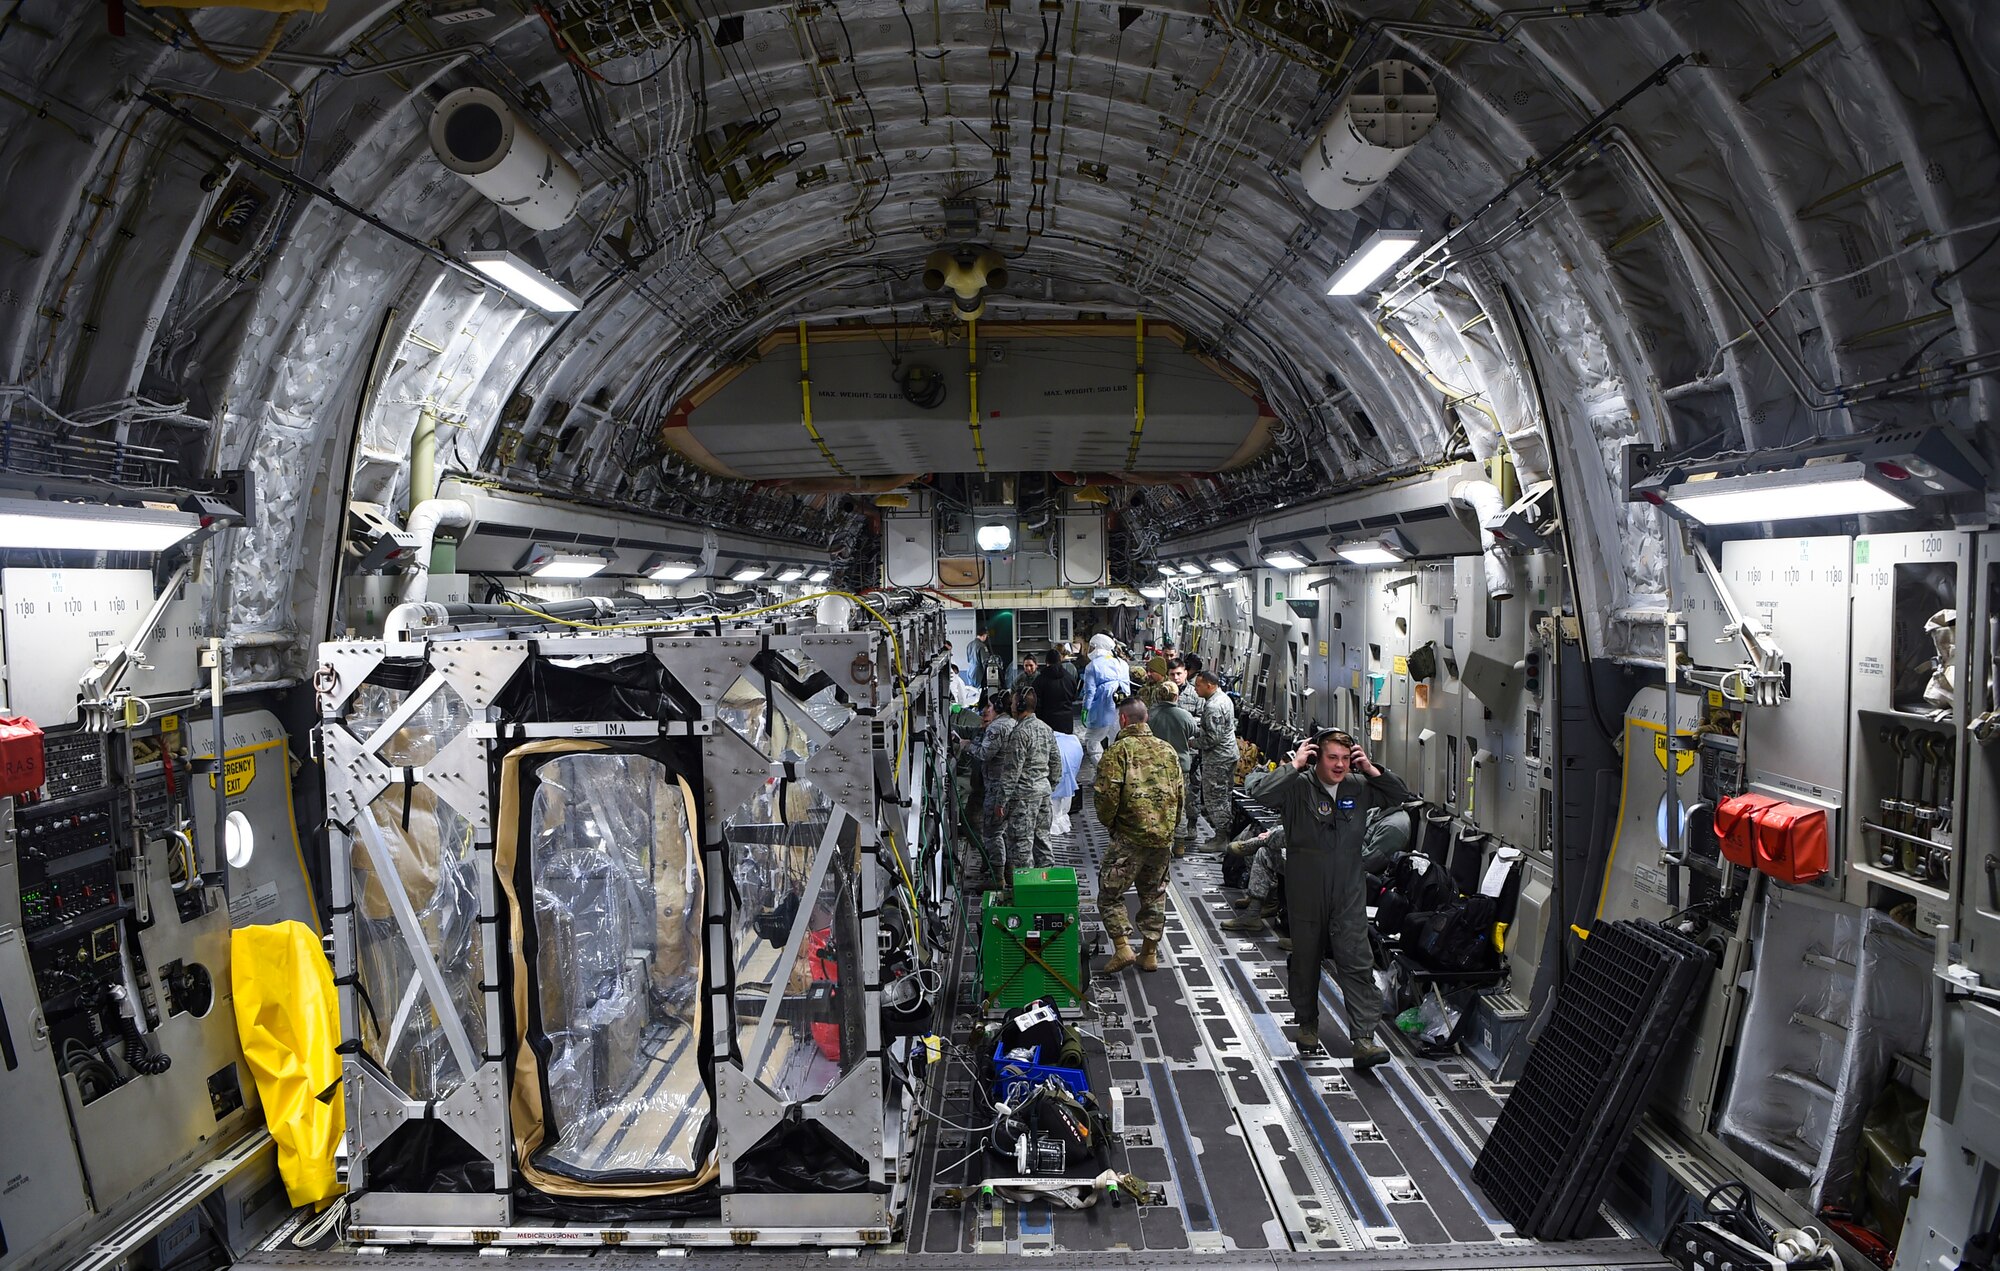 A U.S. Air Force C-17 Globemaster III is prepped to transport a transportation isolation system March 6, 2019, during a training exercise that allows Airmen to practice the most effective and safest form of transportation for patients and their medical professionals. Engineered and implemented after the Ebola virus outbreak in 2014, the TIS is an enclosure the Department of Defense can use to safely transport patients with highly contagious diseases. (U.S. Air Force photo by Senior Airman Cody R. Miller)